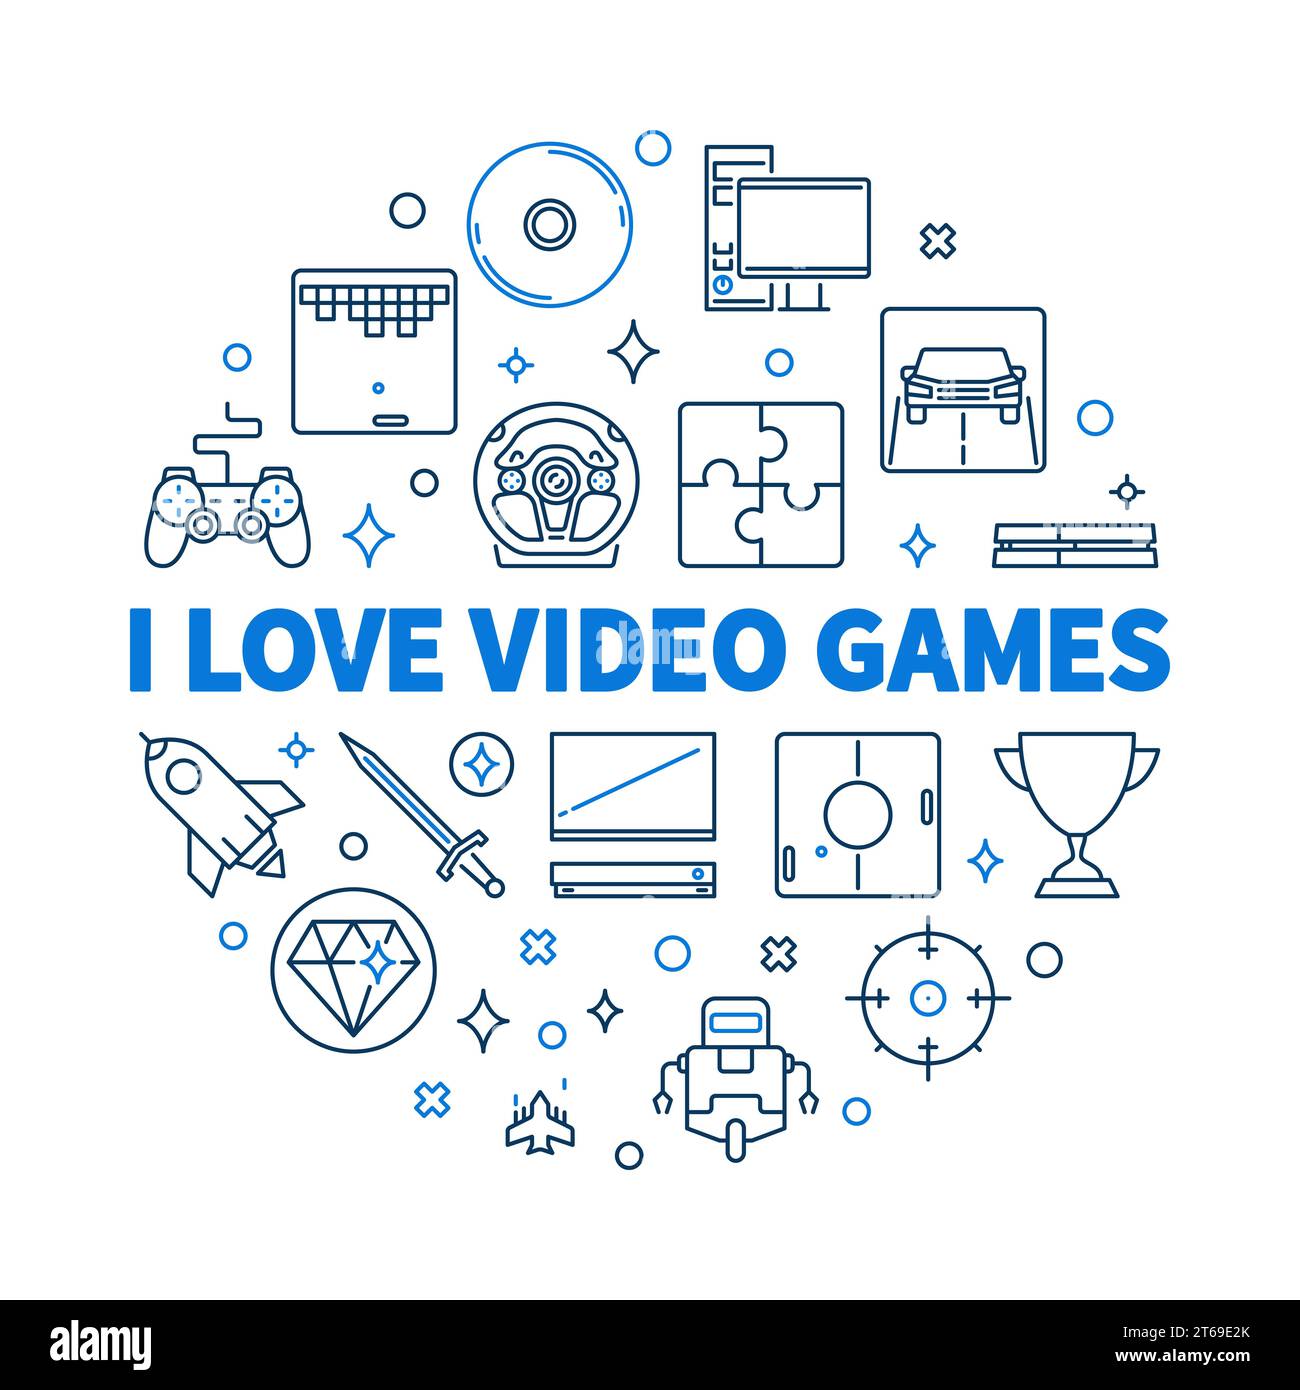 I Love Video Games vector round concept linear illustration Stock Vector